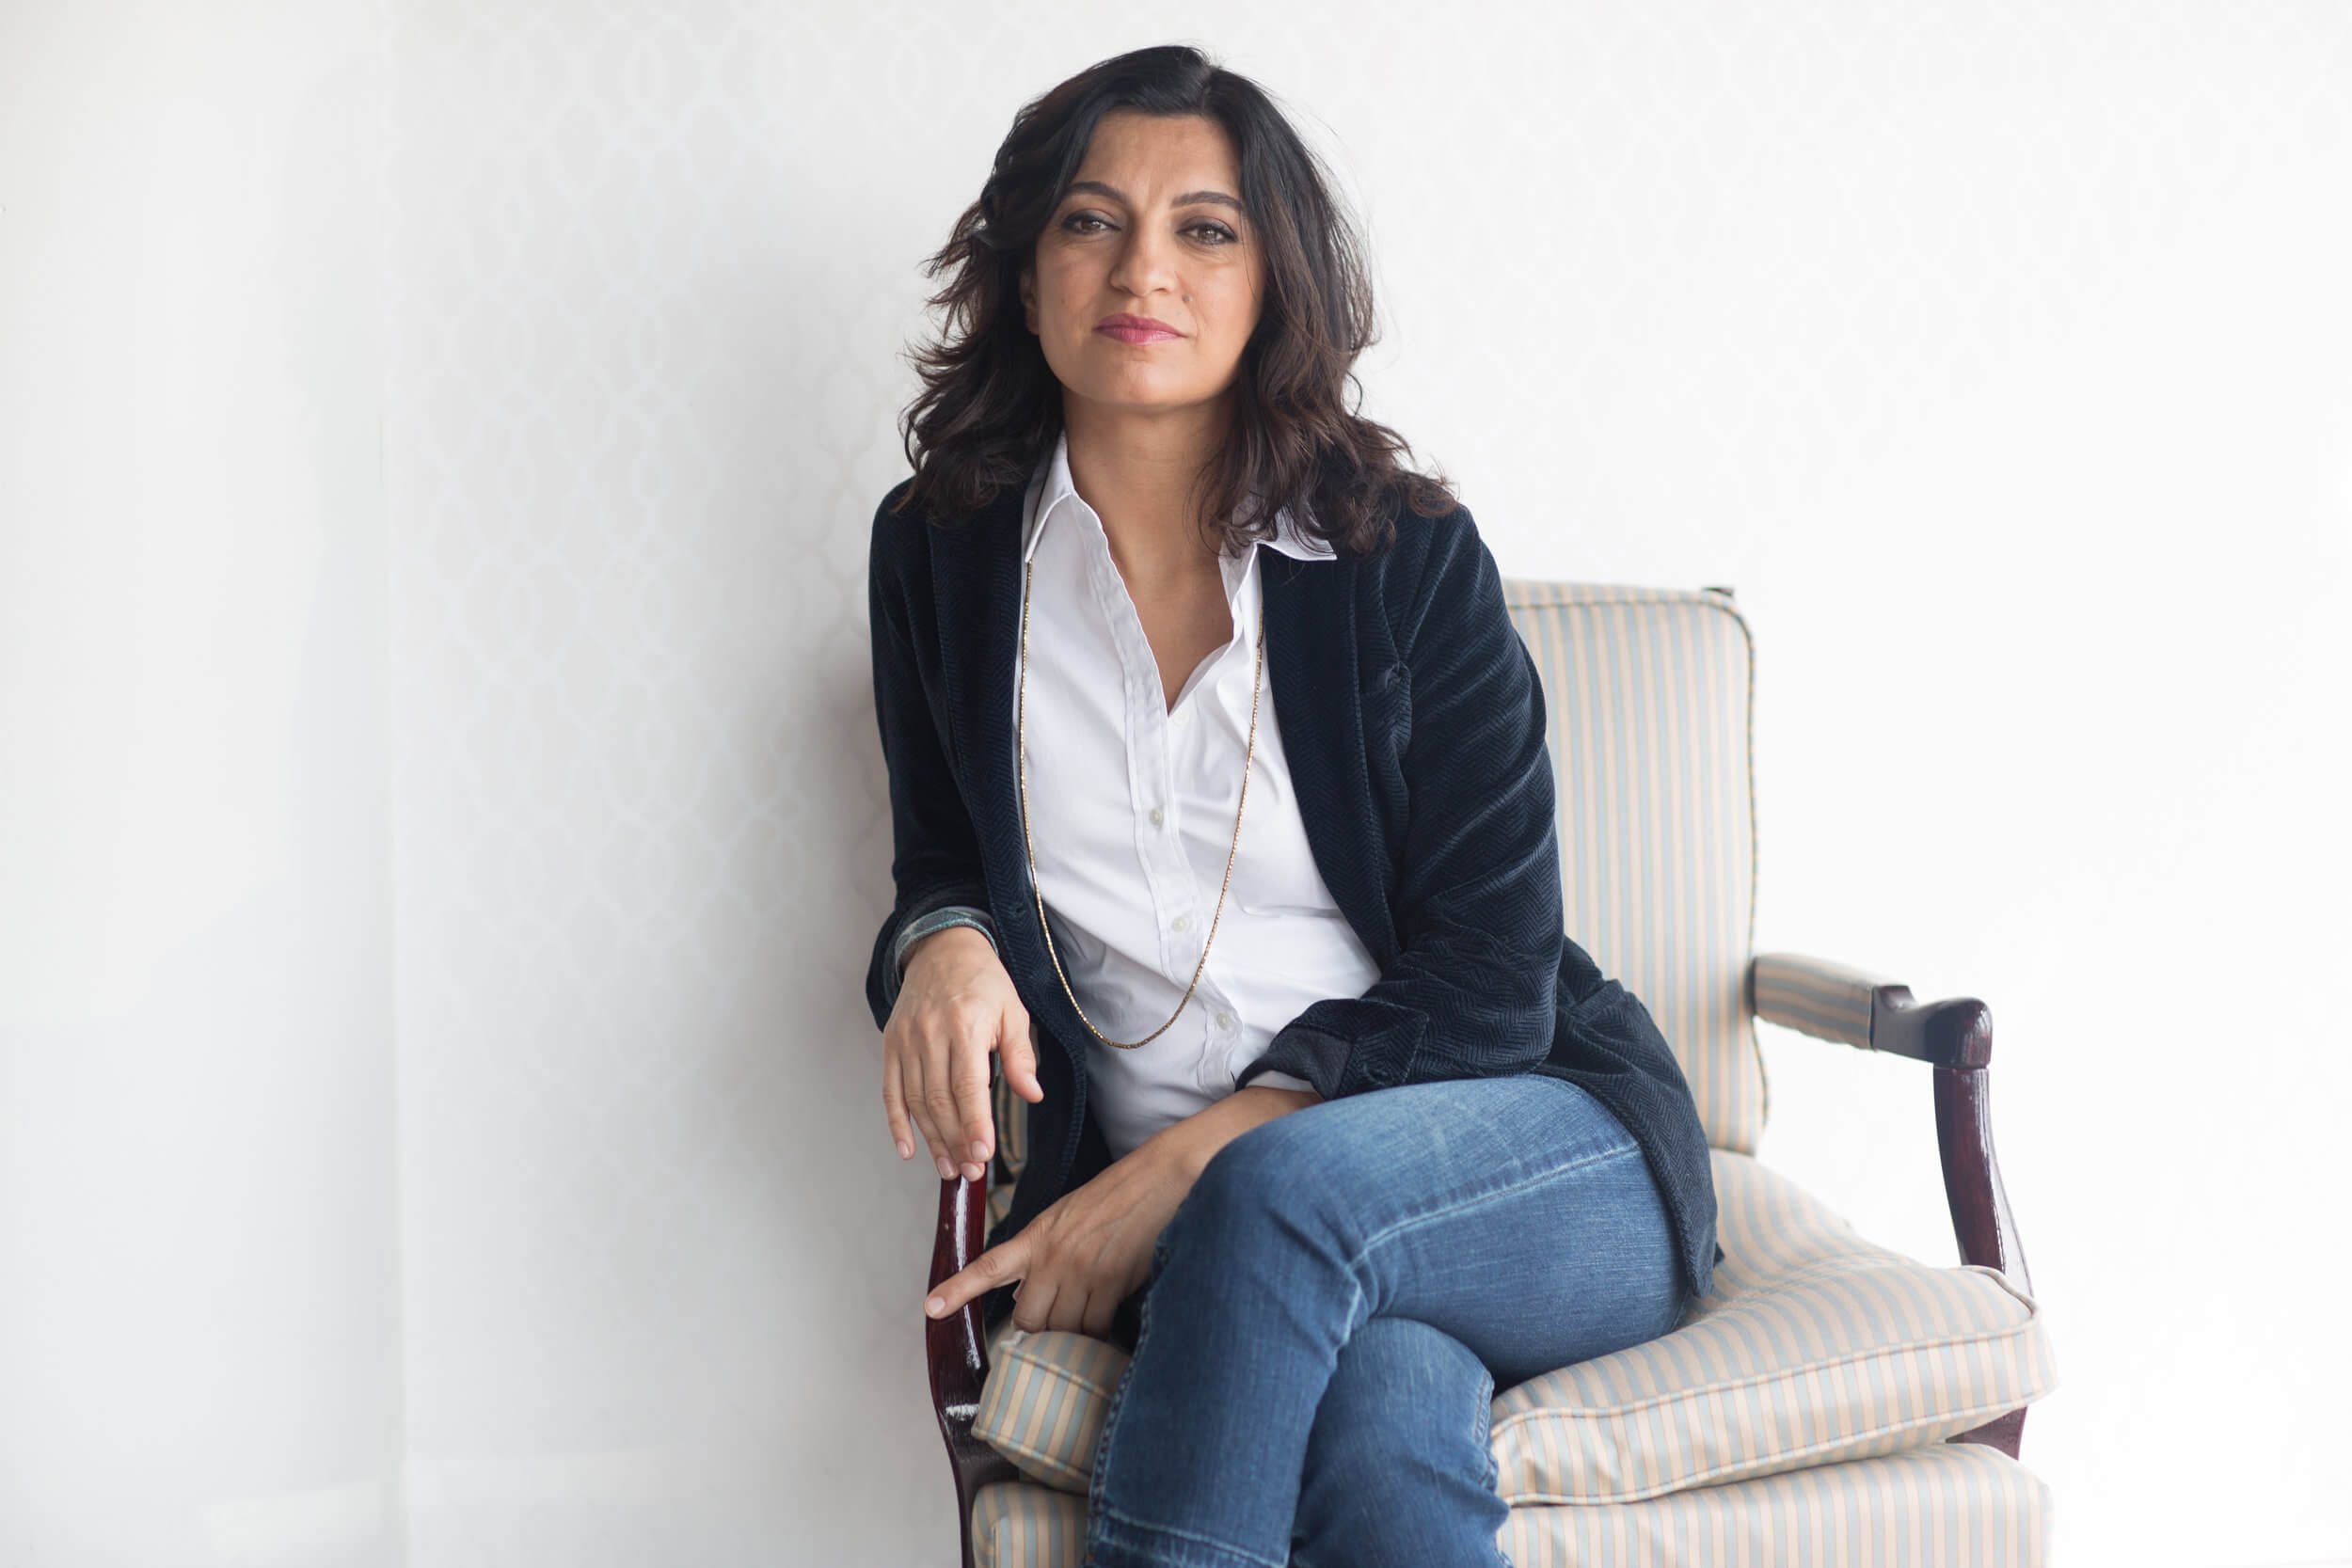 Photograph of Firuzeh Mahmoudi sitting in a chair with a white shirt, black jacket, and blue jeans